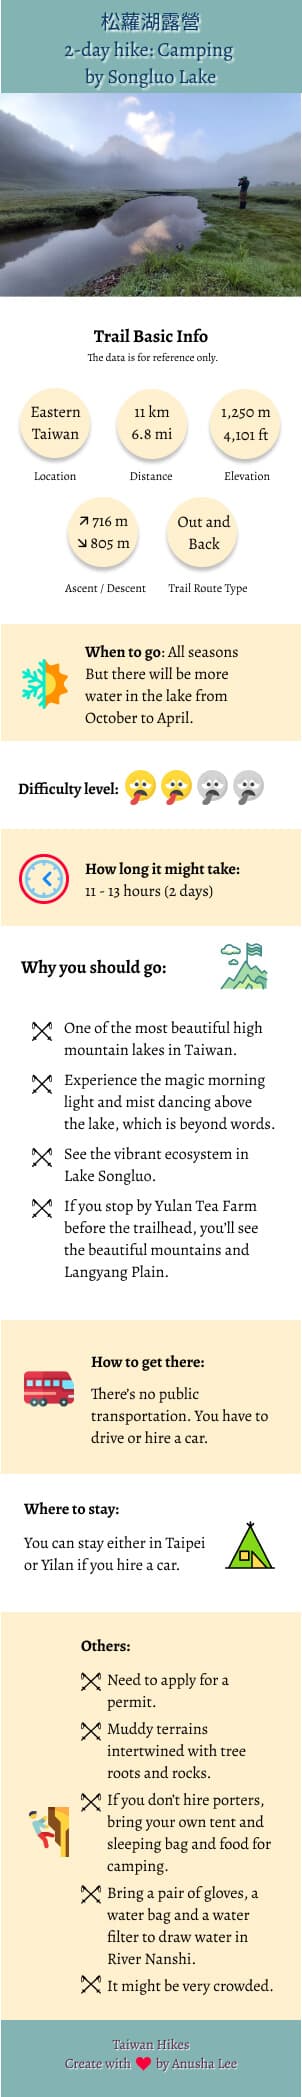 Songluo Lake infographic